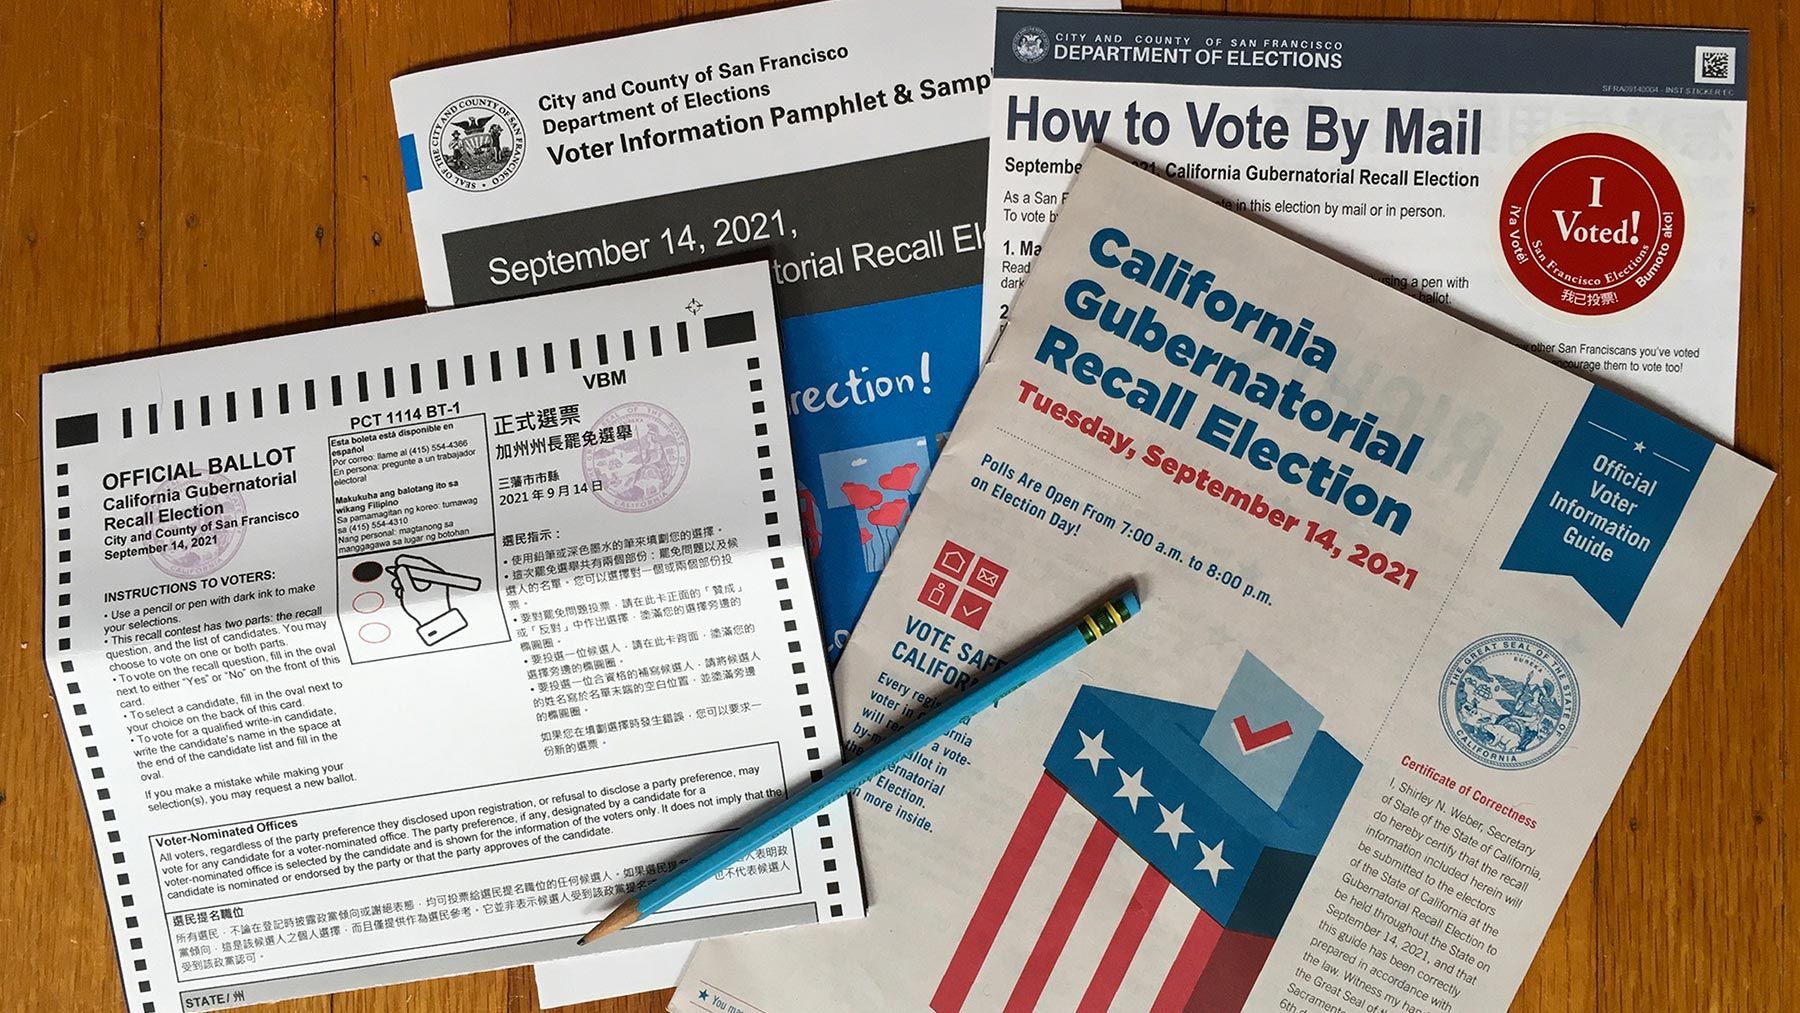 A ballot and voter information guides for the California gubernatorial recall election.